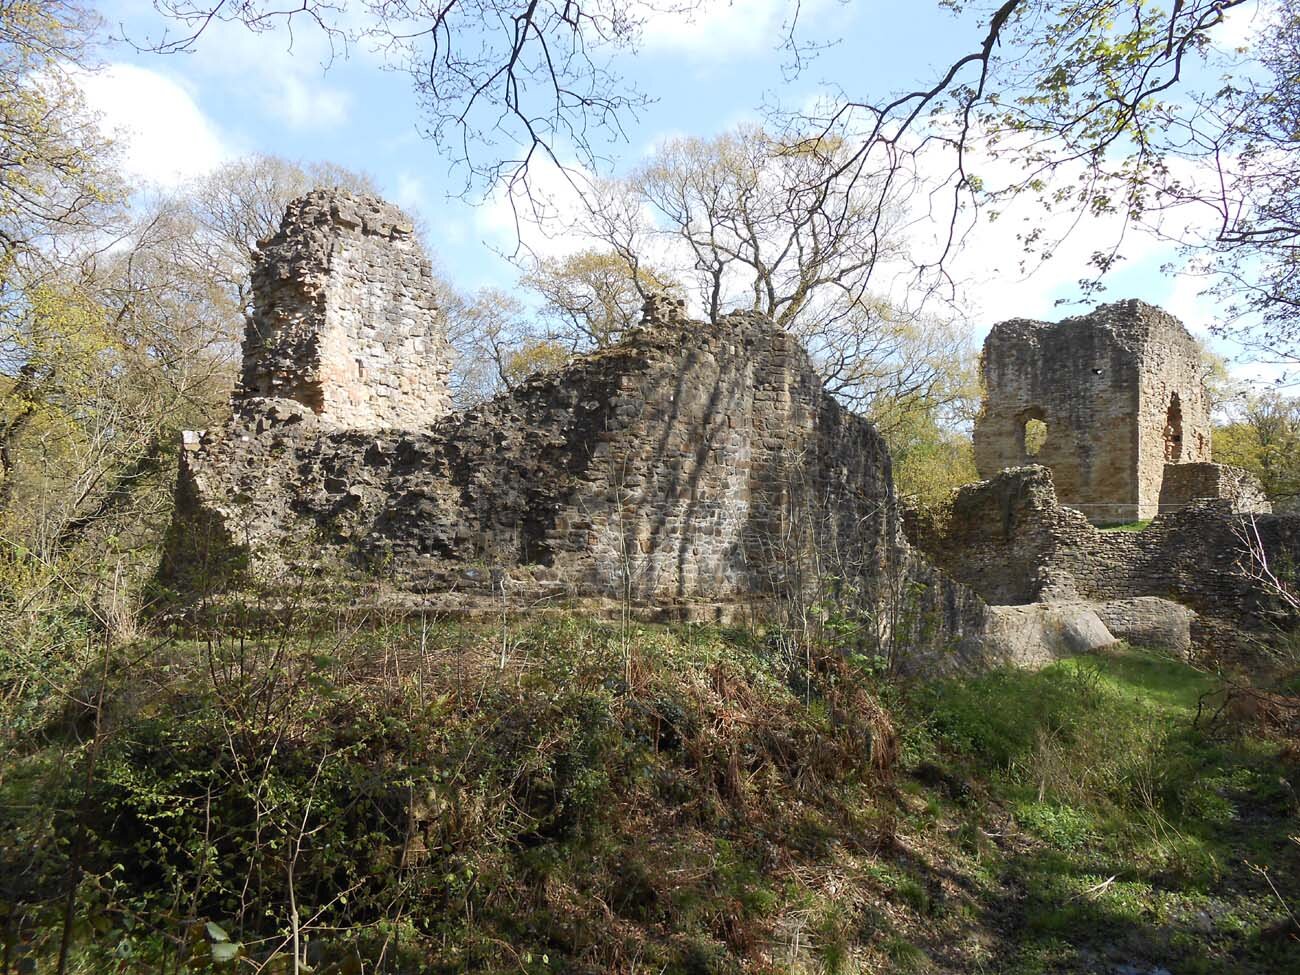 🏰 Croeso Castle Crawlers! 🏰
This week we take a look at Ewloe Castle! One of the castles built by Native Welsh Prince Llewelyn ap Gruffudd - with an apsidal tower, characteristic of the architecture of Welsh Princes.
If you have any pictures from y